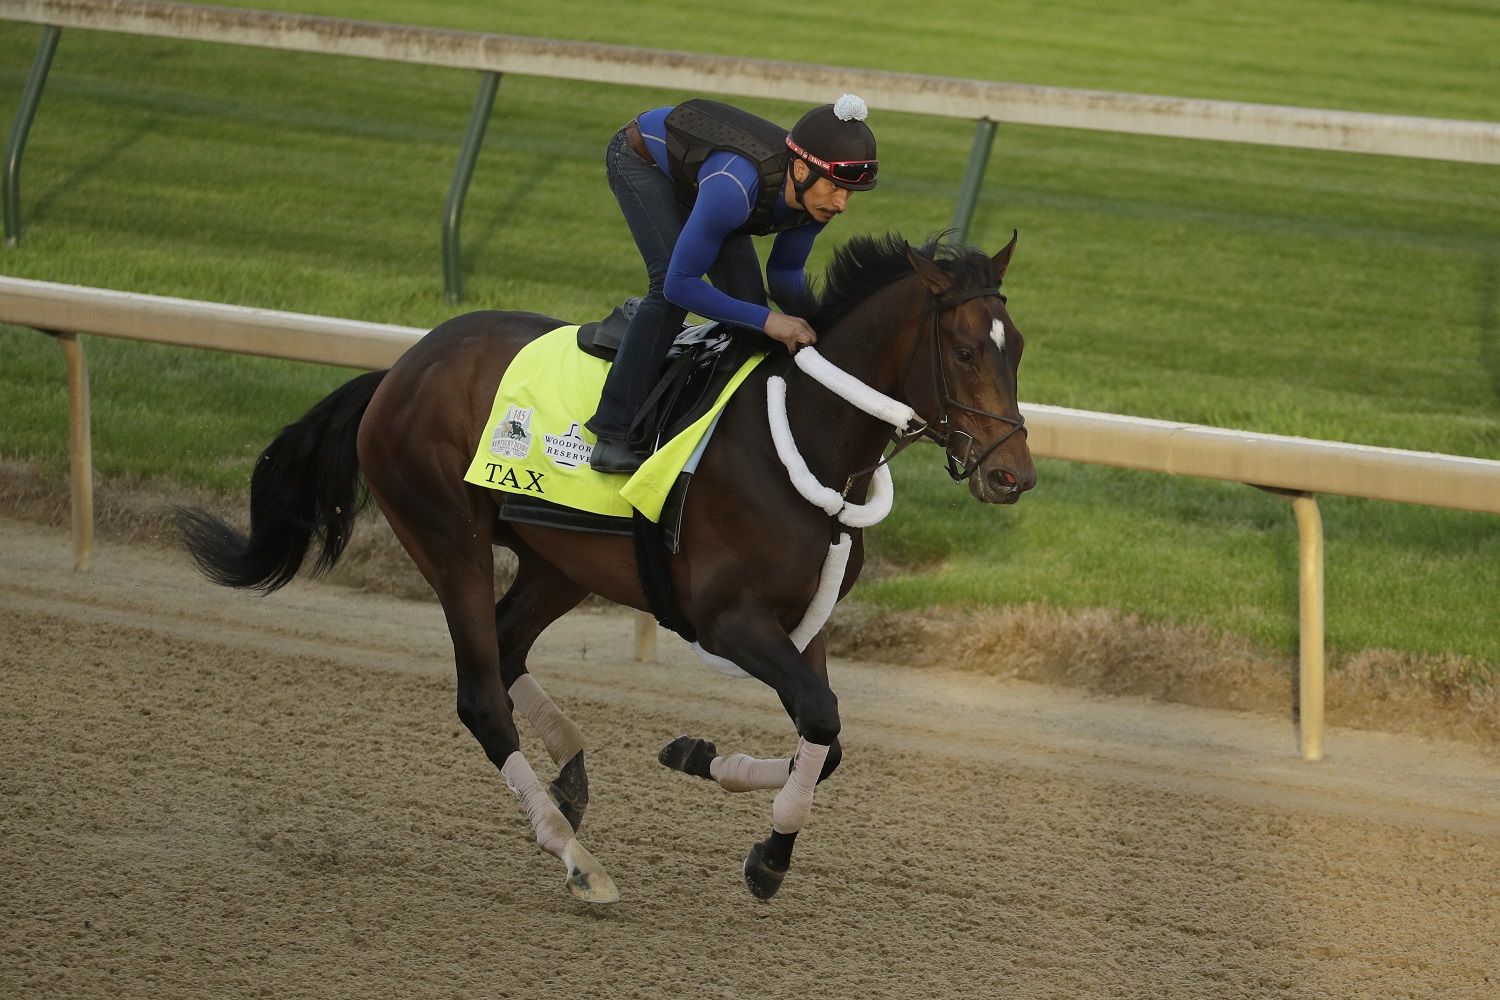 Kentucky Derby entrant Tax runs during a workout at Churchill Downs Wednesday, May 1, 2019, in Louisville, Ky. The 145th running of the Kentucky Derby is scheduled for Saturday, May 4. (AP Photo/Charlie Riedel)